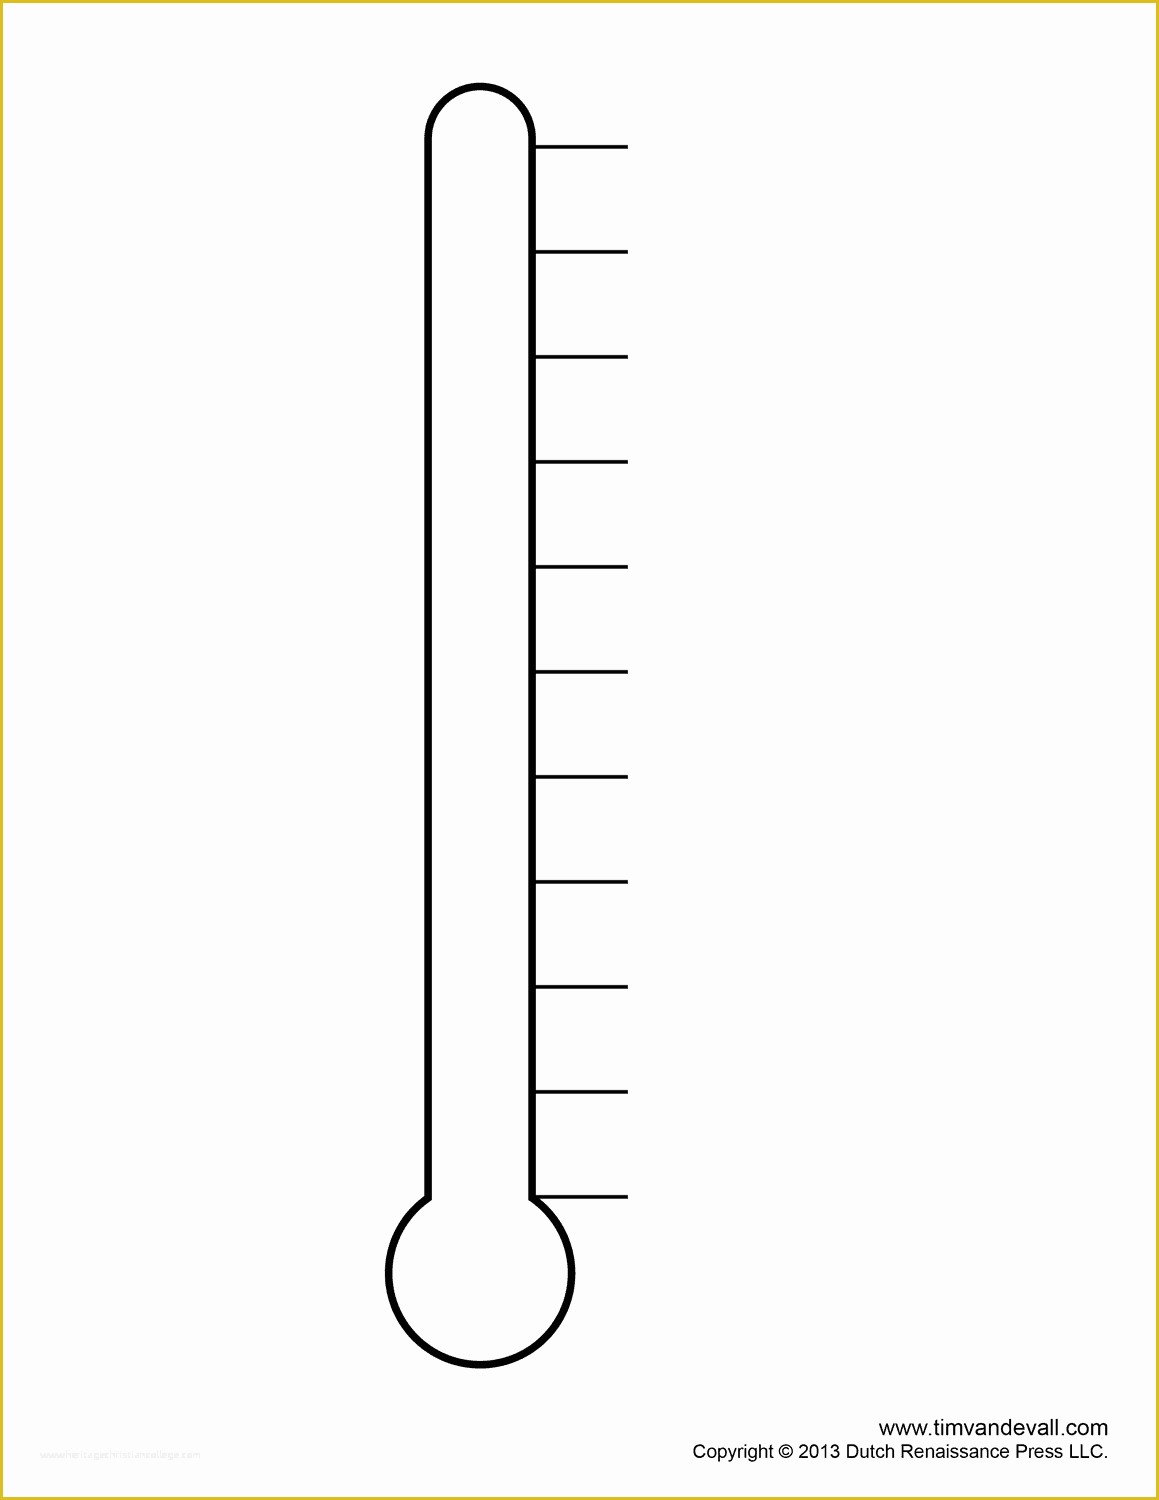 free-editable-thermometer-template-of-goal-thermometer-hd-clipart-heritagechristiancollege